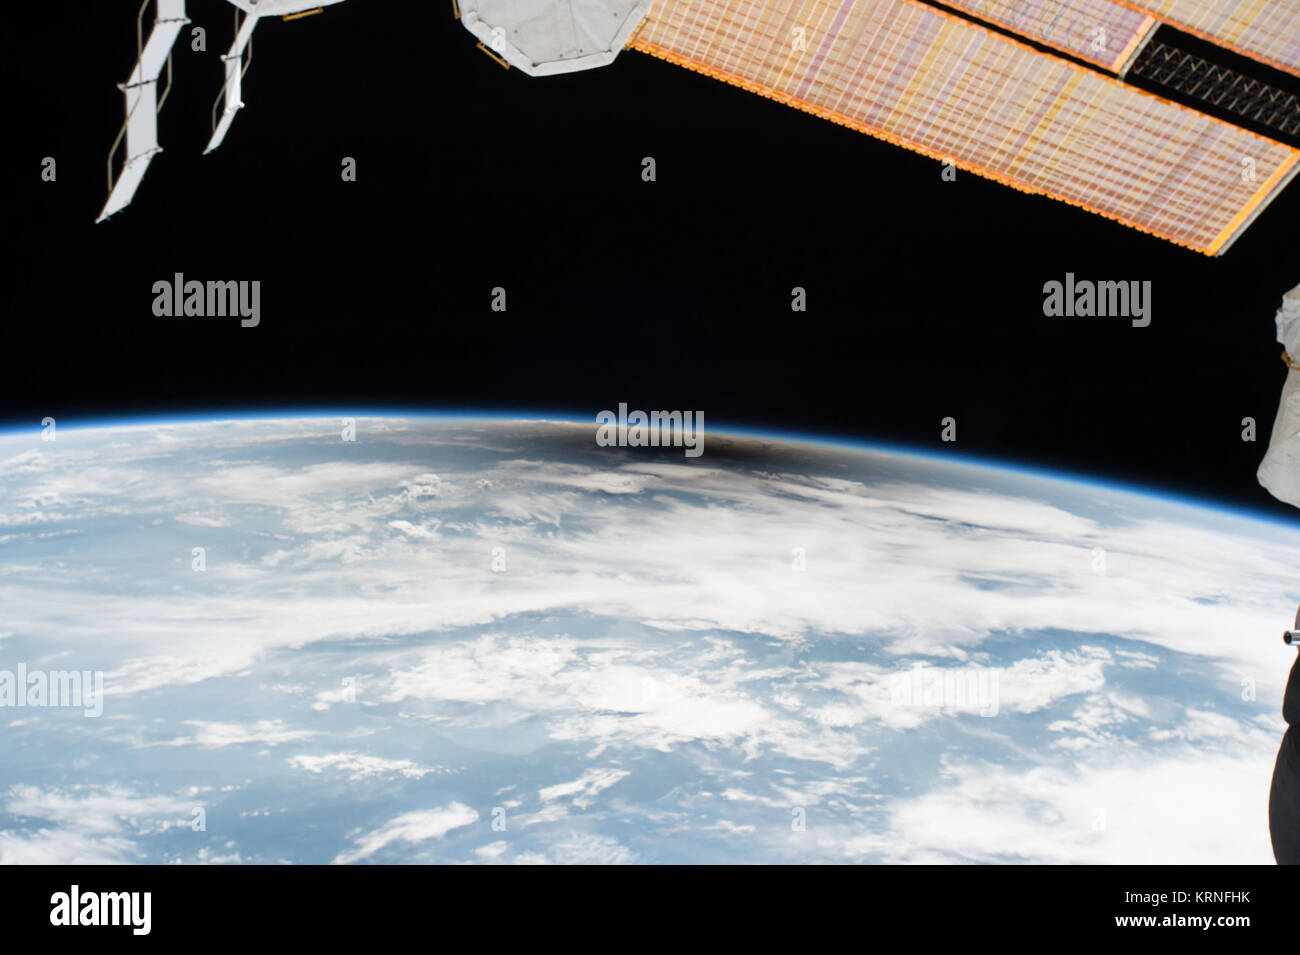 iss052e056222 (Aug. 21, 2017) --- As millions of people across the United States experienced a total eclipse as the umbra, or moon’s shadow passed over them, only six people witnessed the umbra from space. Viewing the eclipse from orbit were NASA’s Randy Bresnik, Jack Fischer and Peggy Whitson, ESA (European Space Agency’s) Paolo Nespoli, and Roscosmos’ Commander Fyodor Yurchikhin and Sergey Ryazanskiy. The space station crossed the path of the eclipse three times as it orbited above the continental United States at an altitude of 250 miles. ISS-52 Eclipse 2017 Umbra Viewed from Space (2) Stock Photo